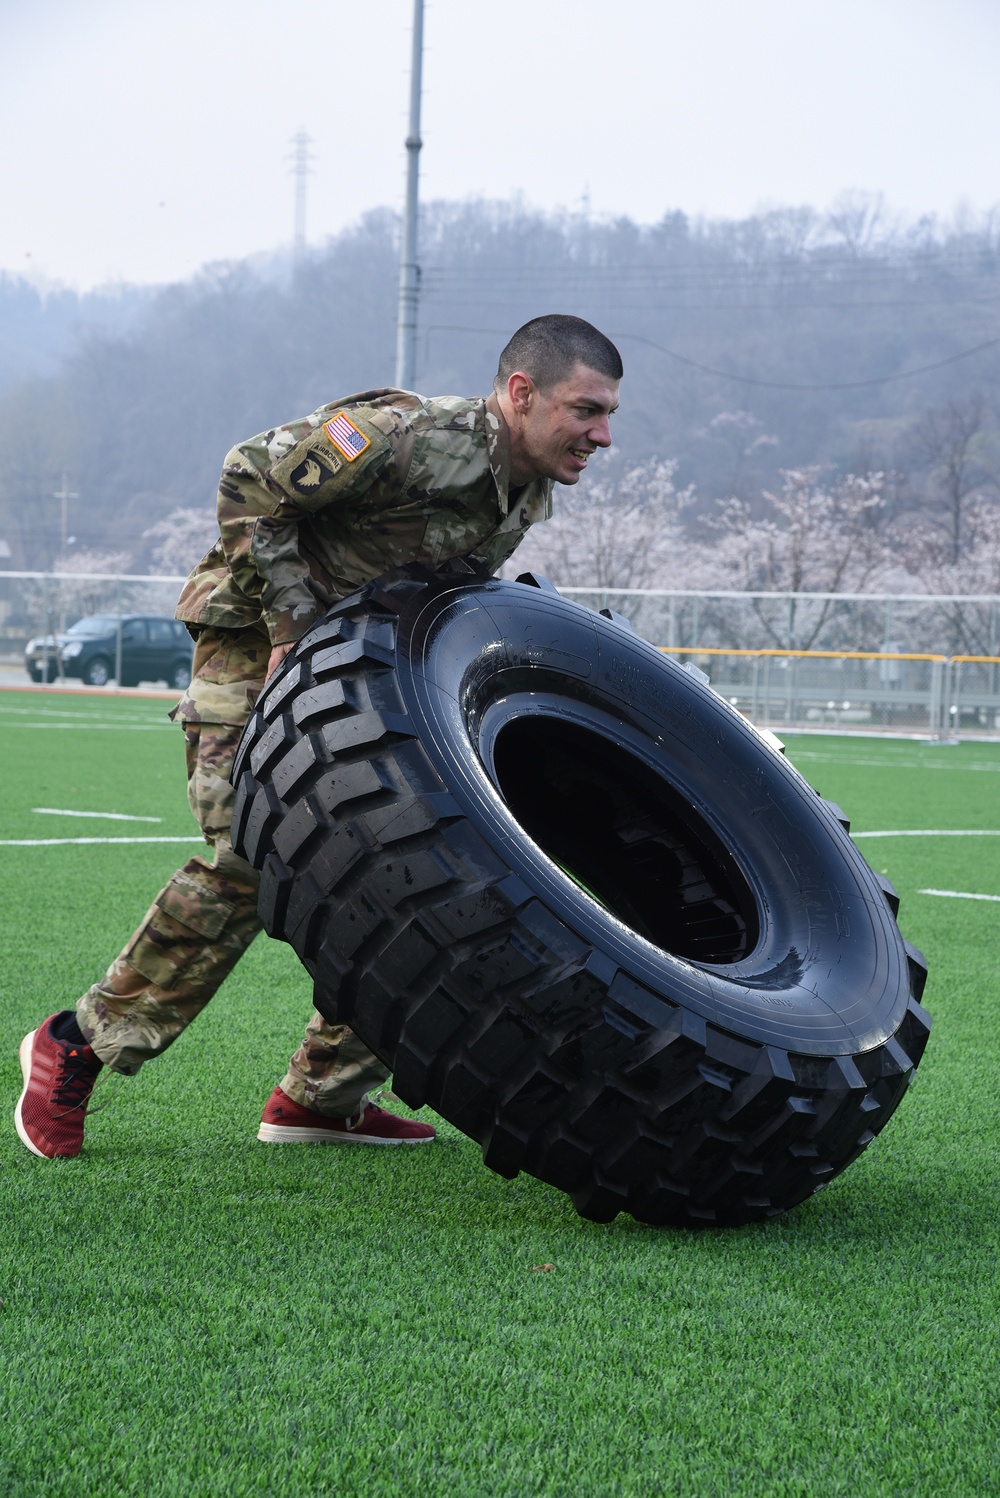 2nd Infantry Division/ROK-U.S. Combined Division 2018 Best Warrior Competition Command Shown: 2nd Infantry Division/ROK-U.S. Combined Division